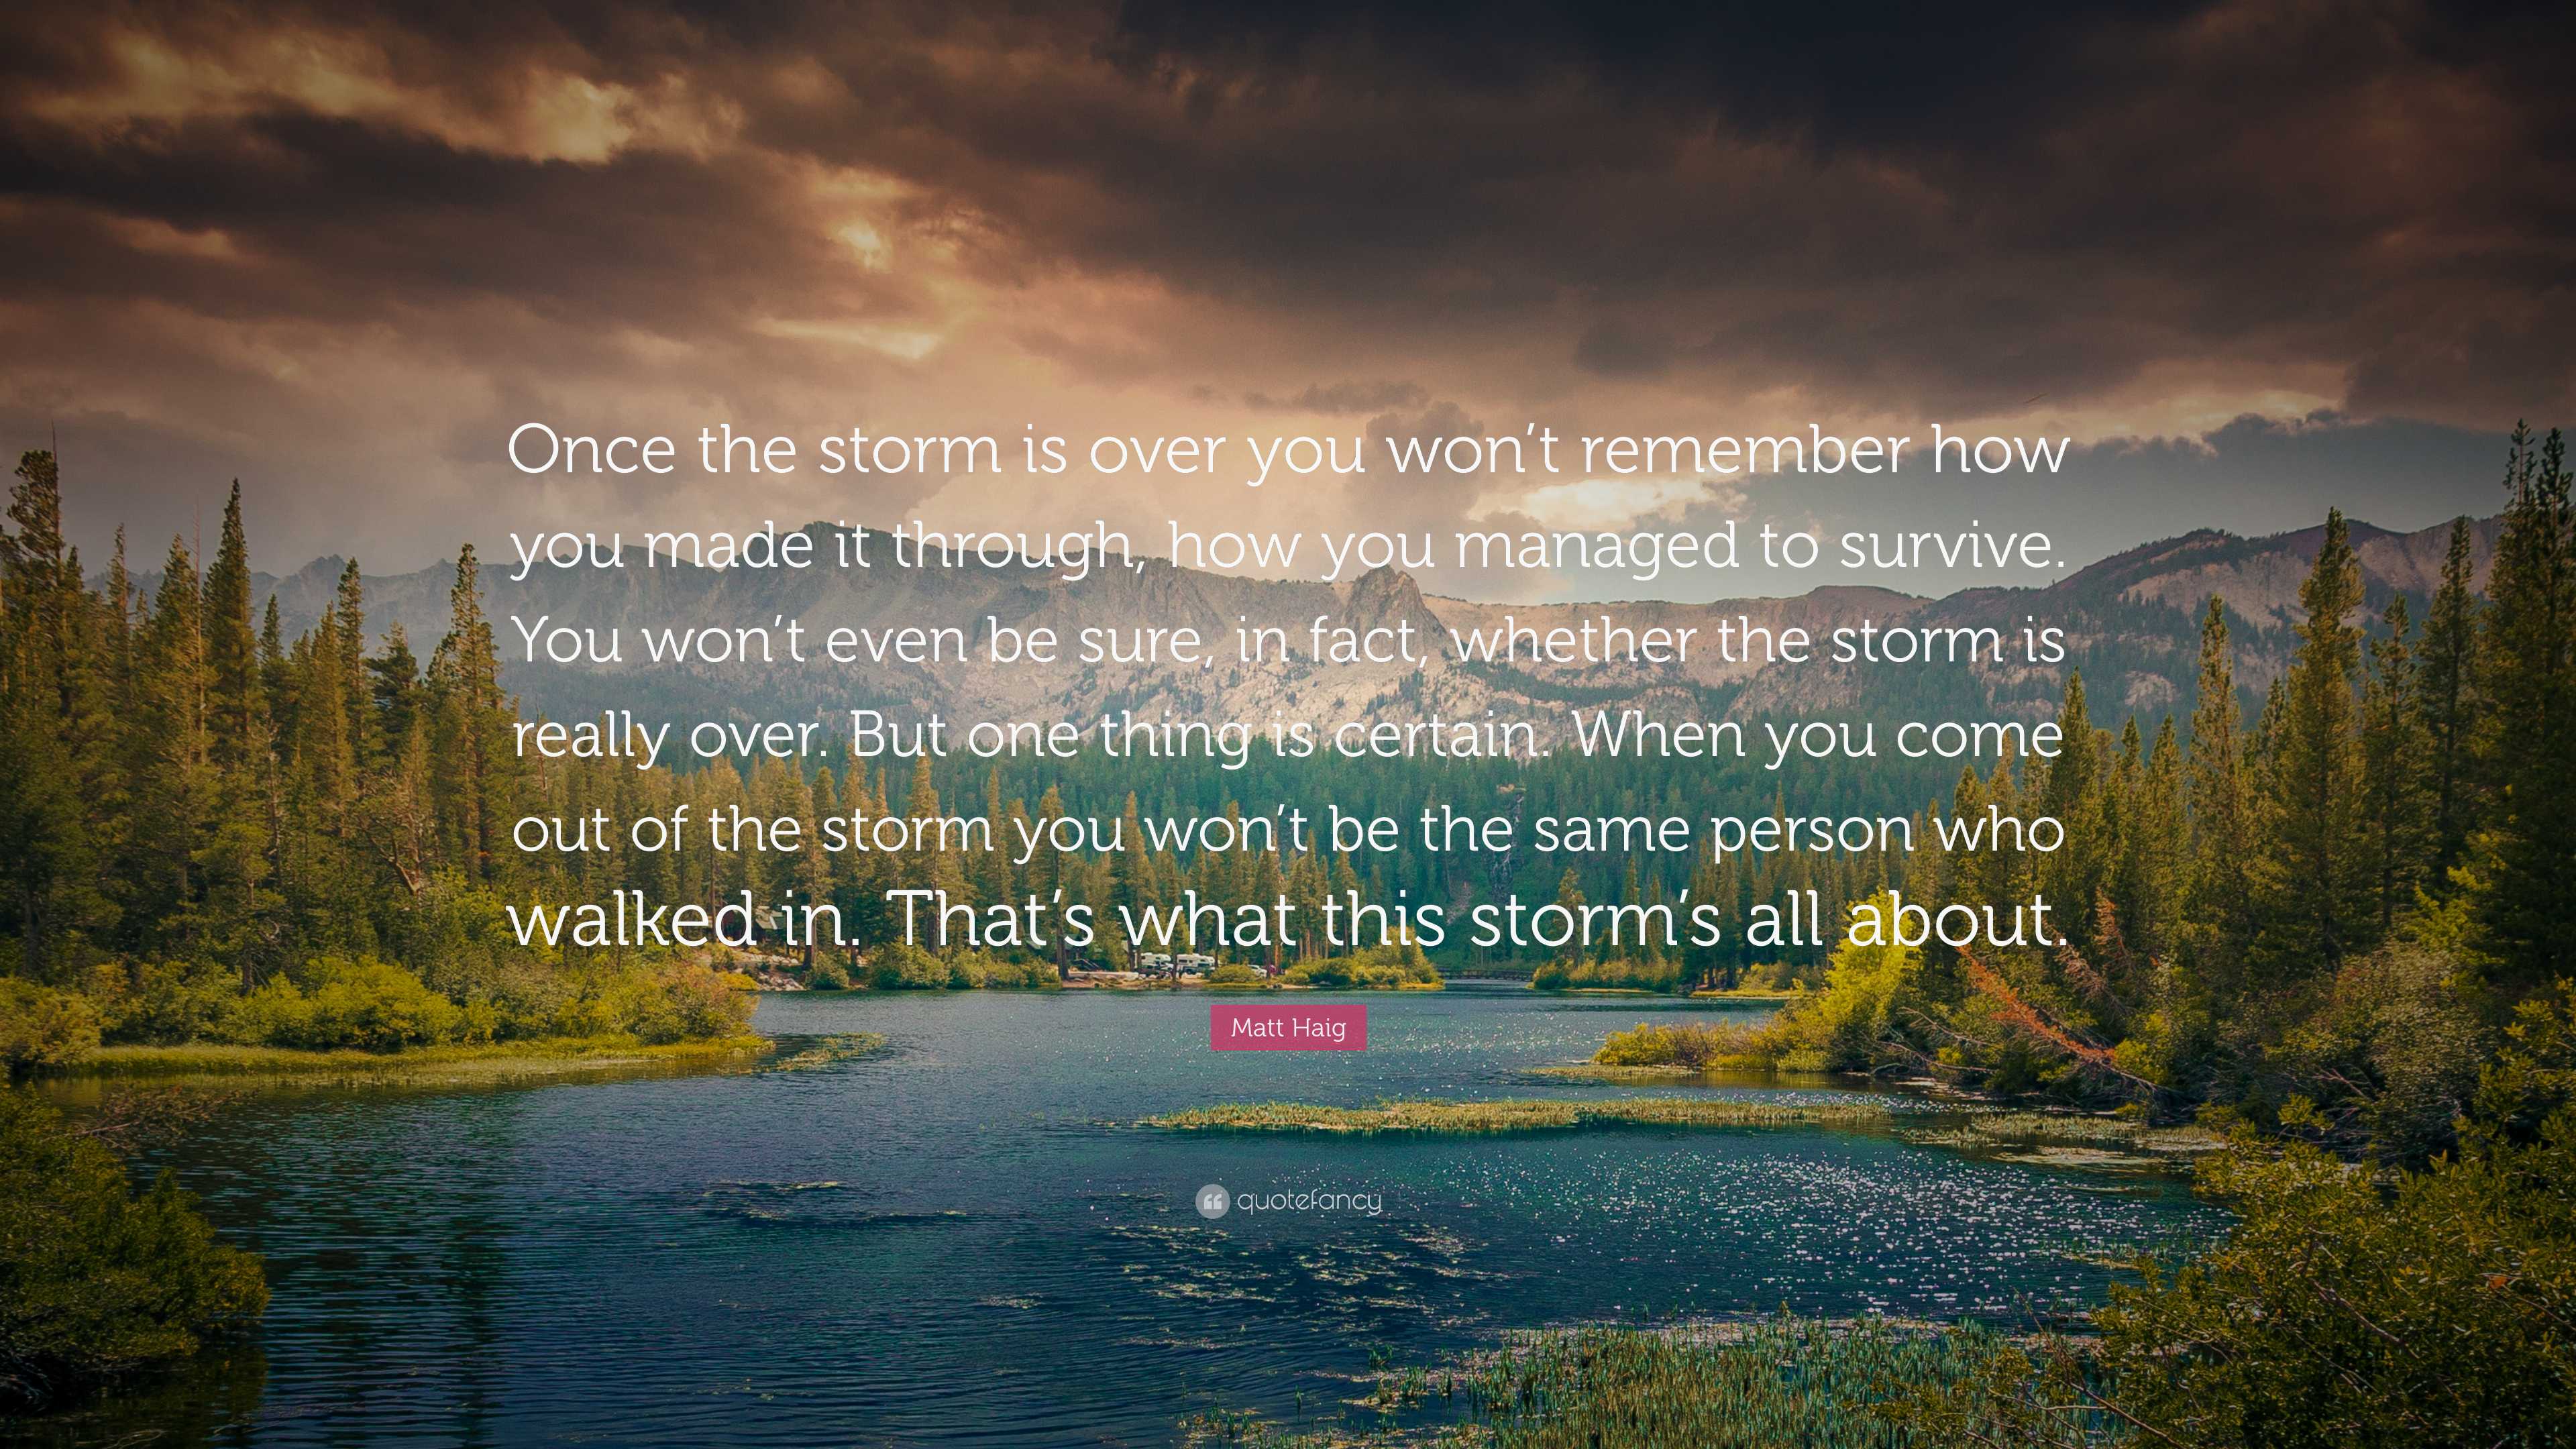 Matt Haig Quote: “Once the storm is over you won’t remember how you ...